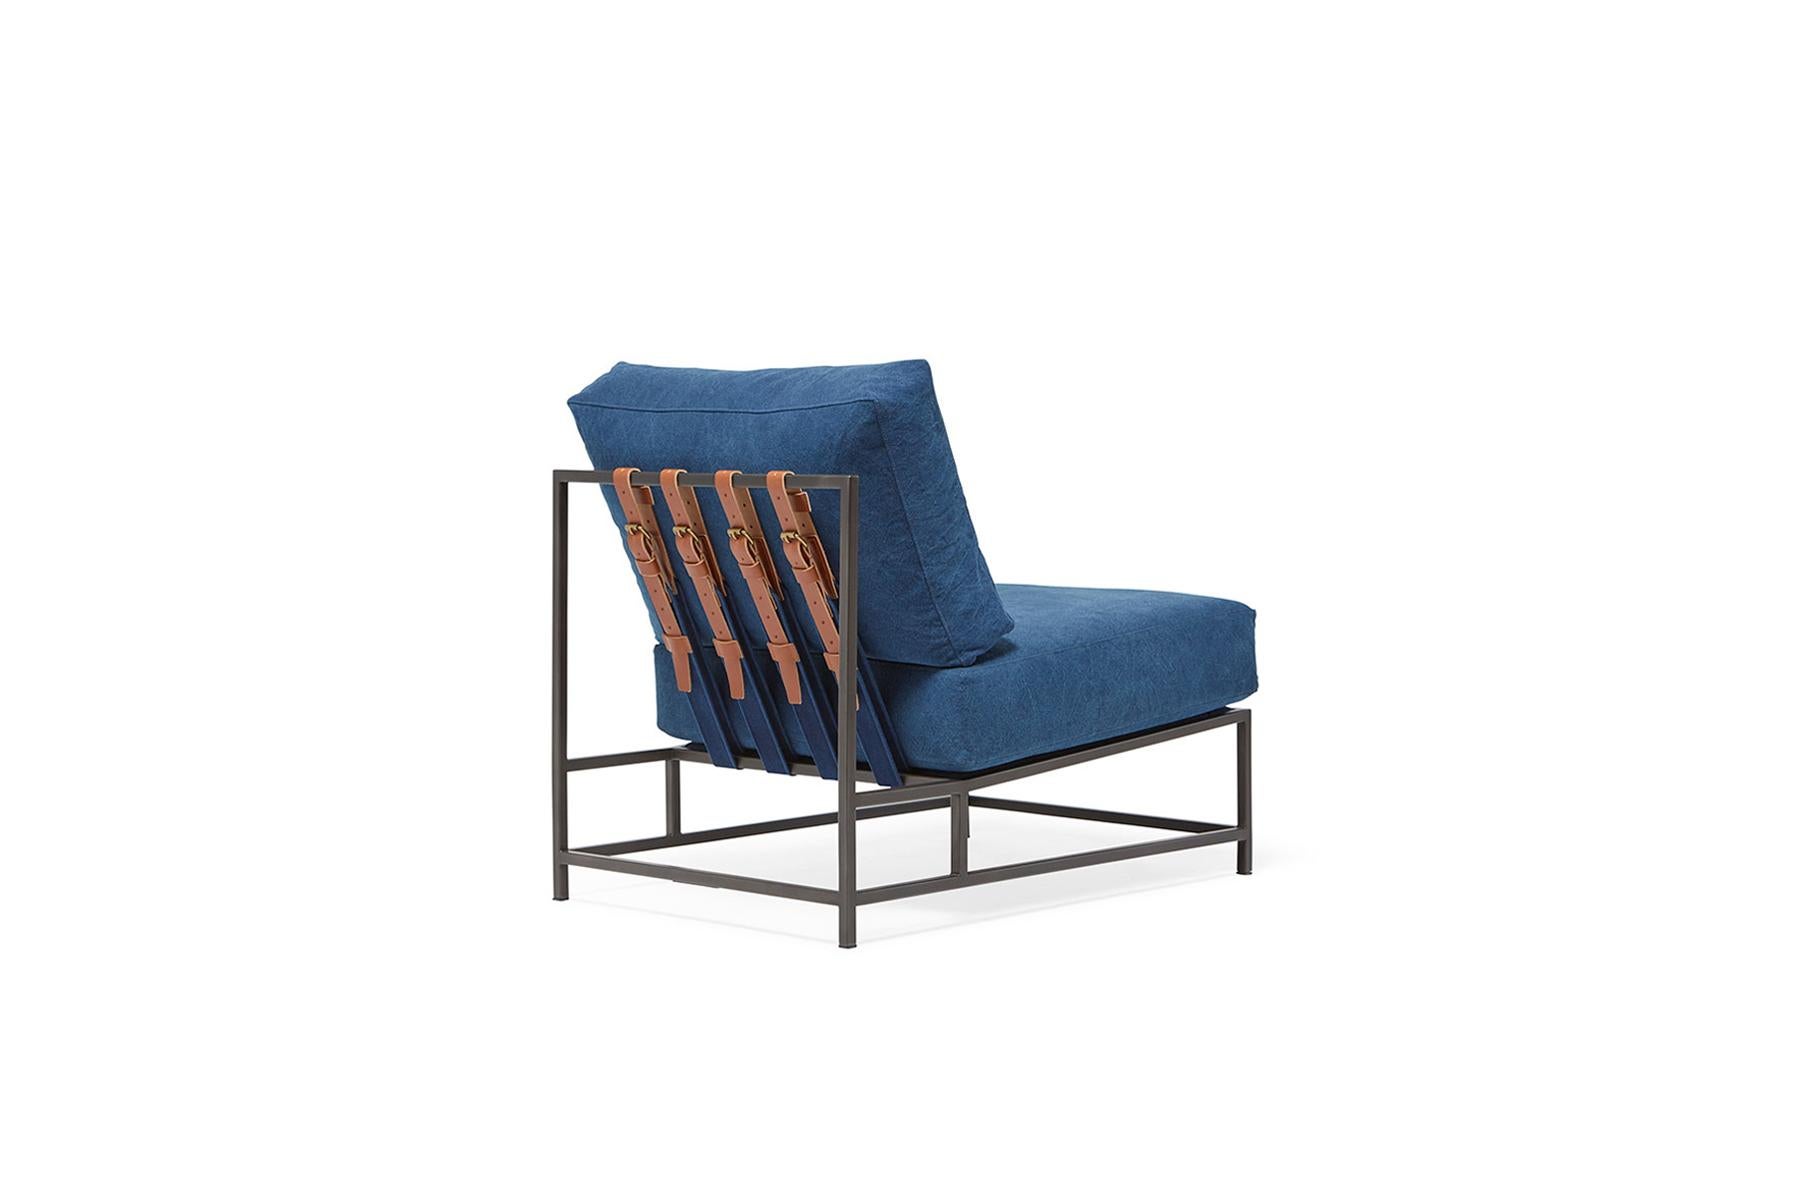 American Hand-Dyed Indigo Canvas and Blackened Steel Chair For Sale